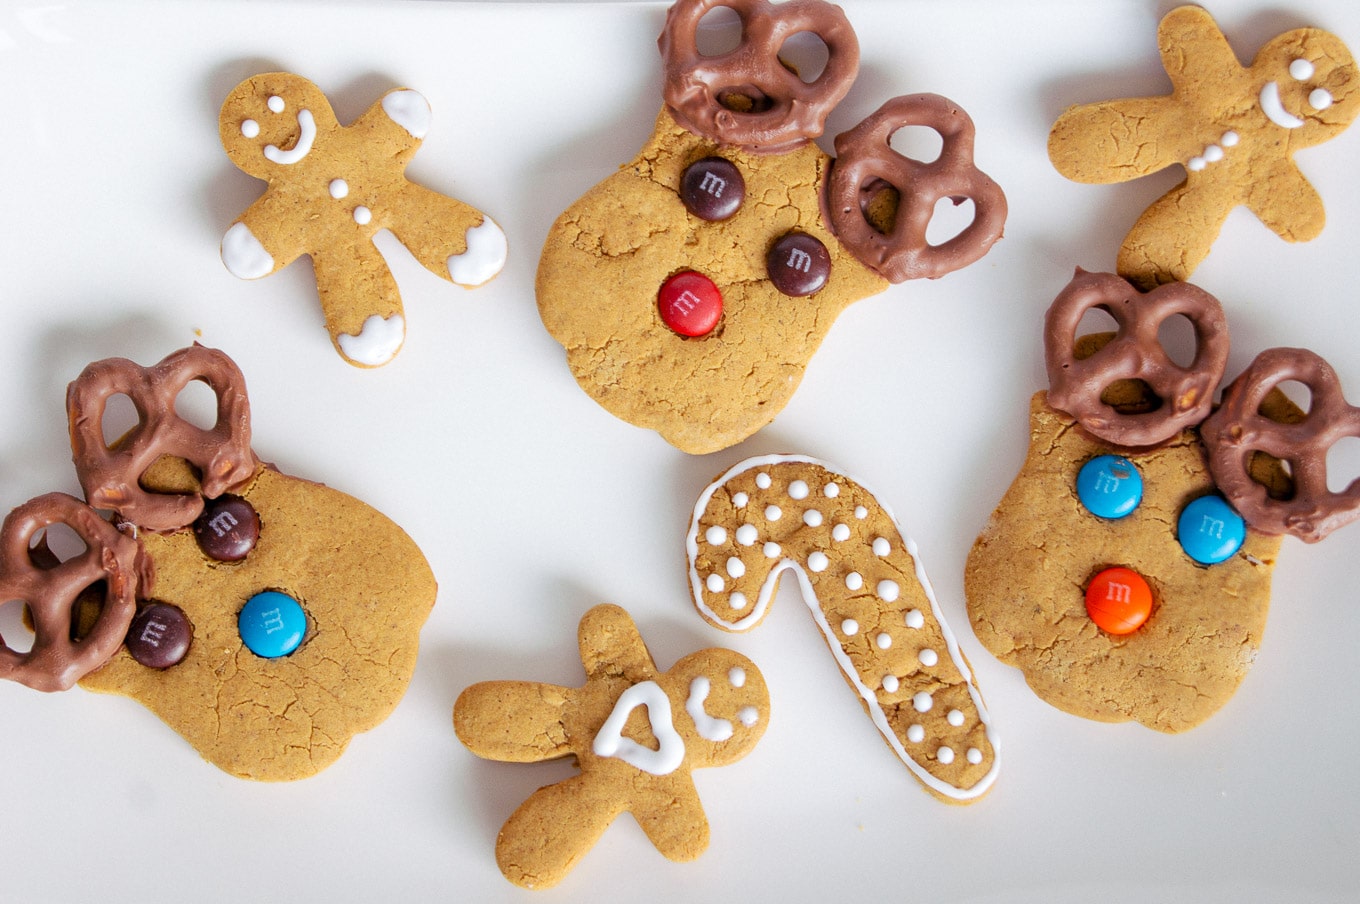 A photo of various gingerbread cookies for Christmas, including some of gingerbread moose with smarties for their eyes and nose, and chocolate-covered pretzels for antlers.